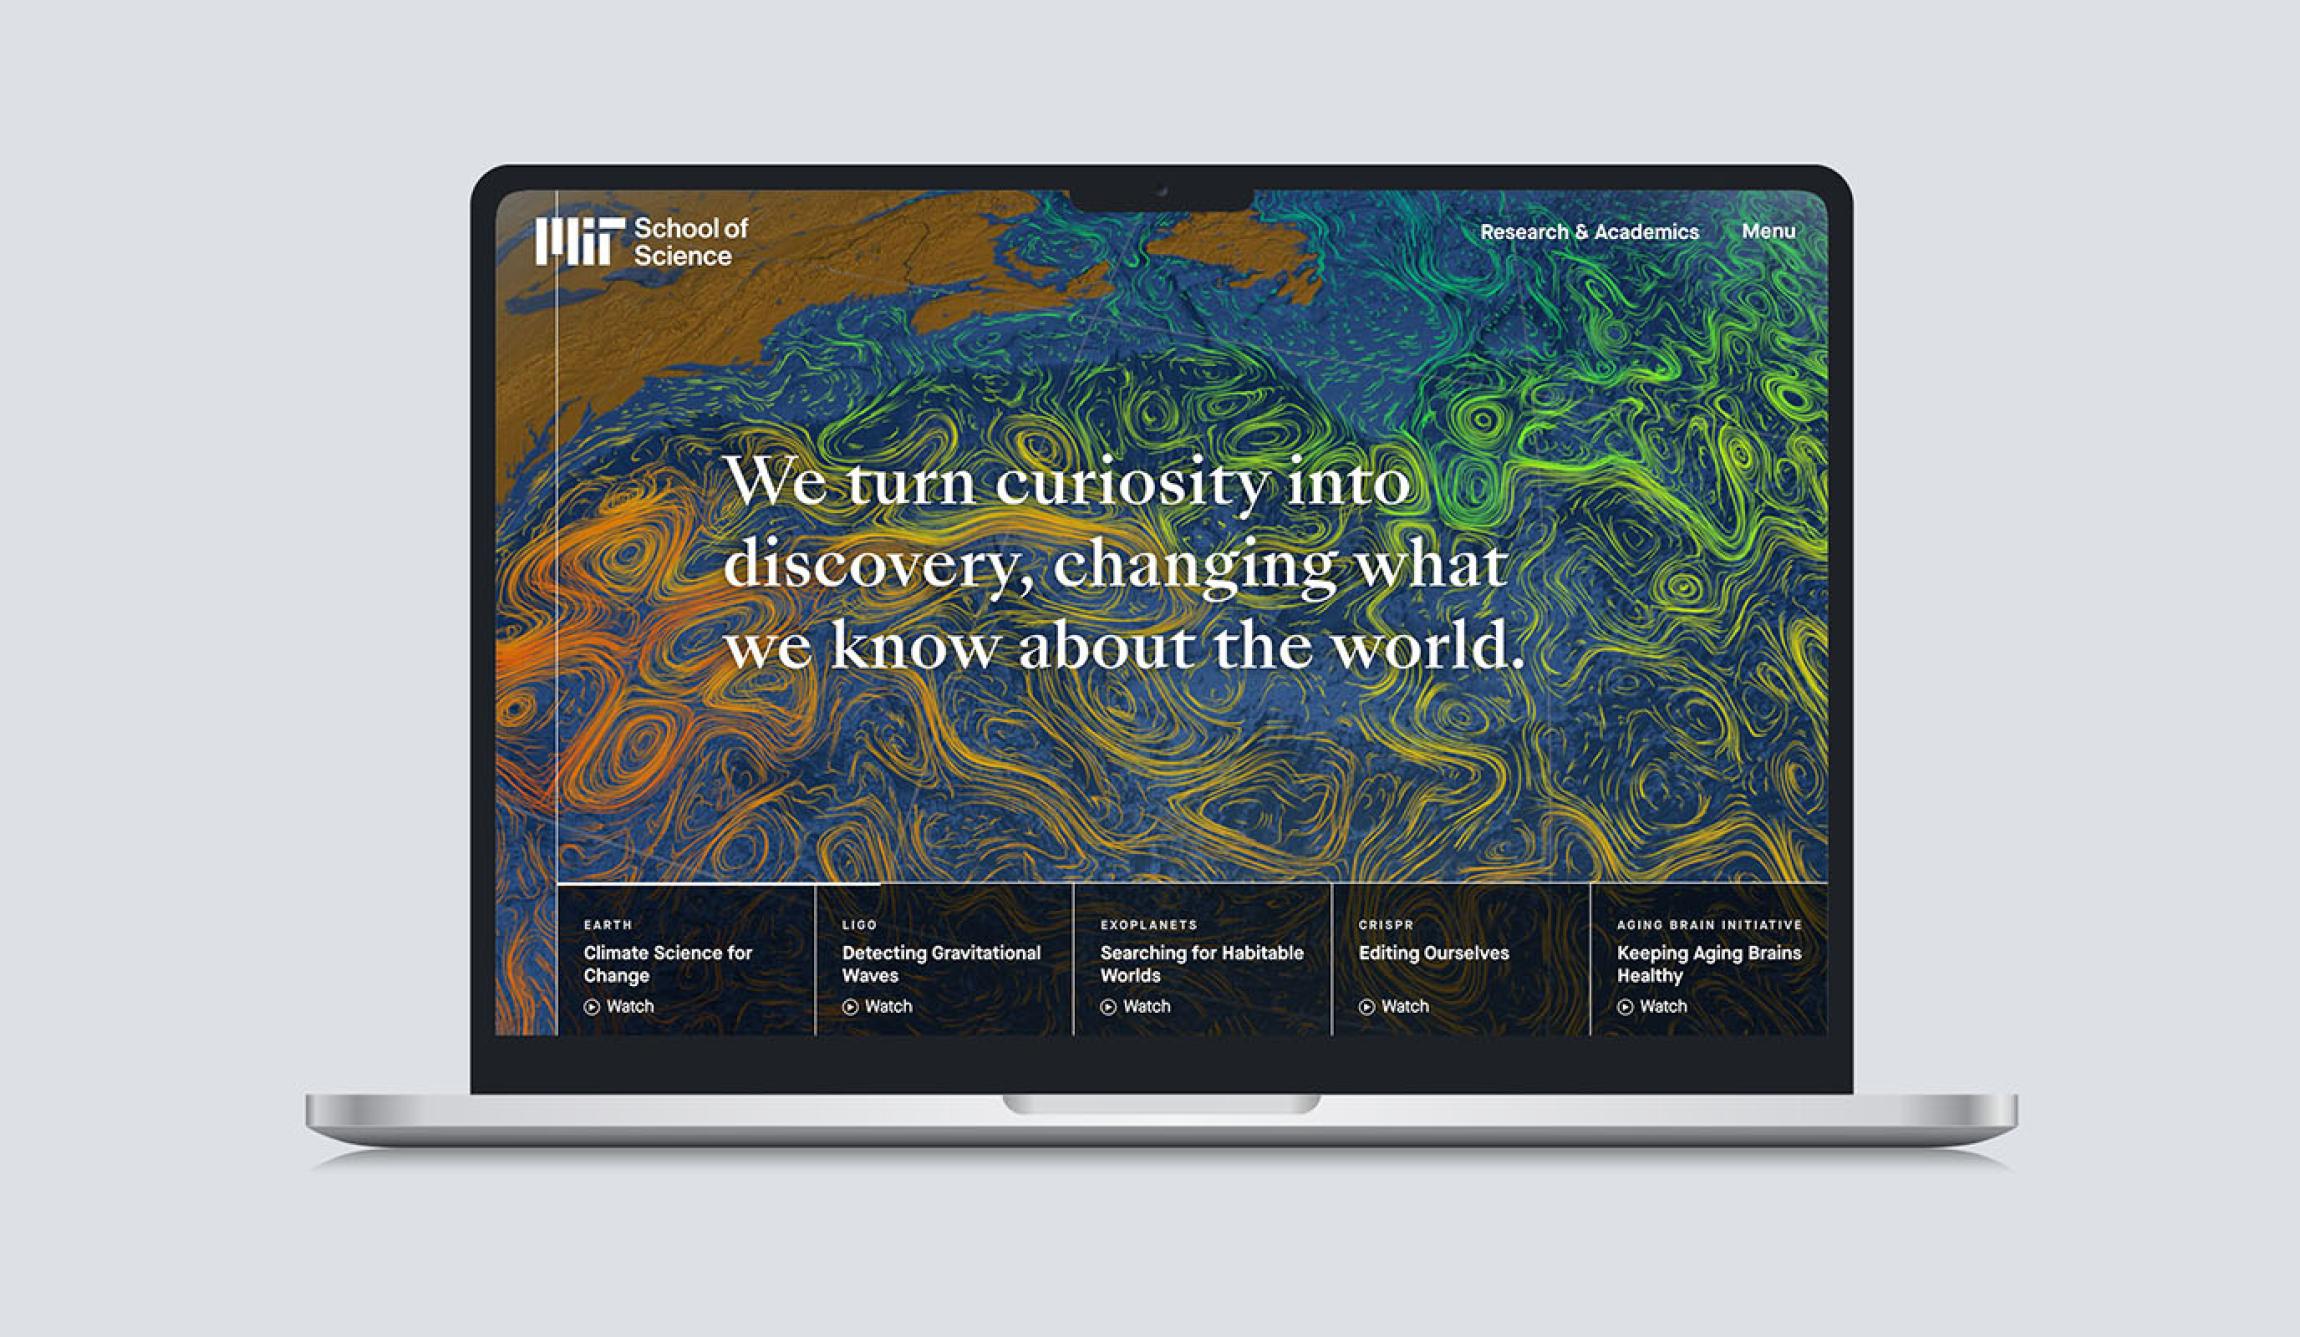 Screenshot of the MIT School of Science website, which shows their sub-brand logo in white.